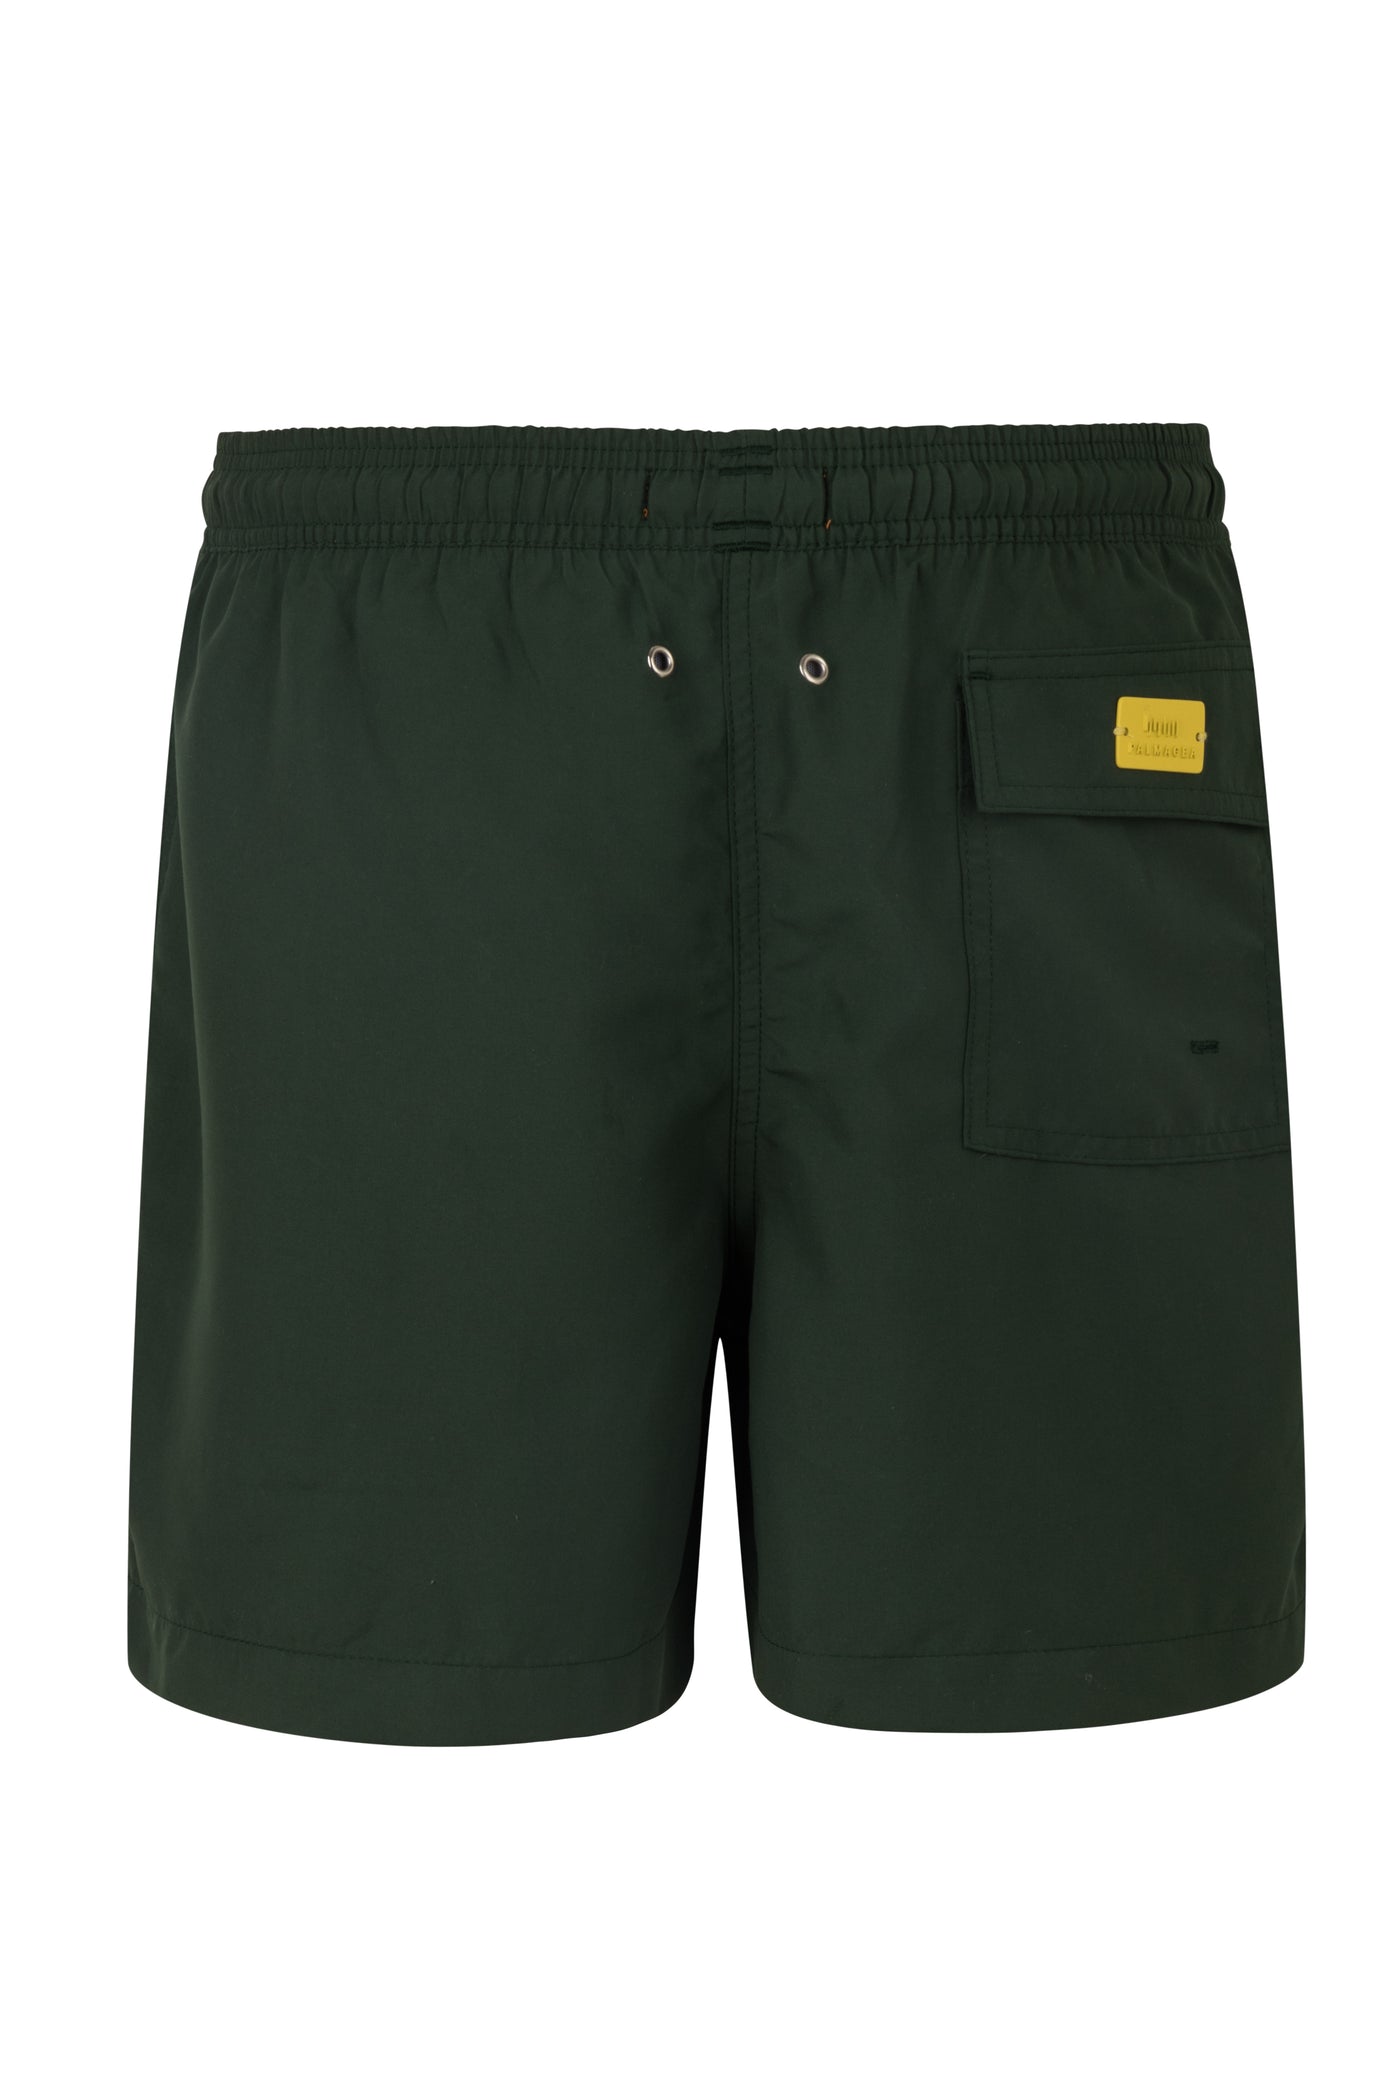 Fort Military Green Trunk